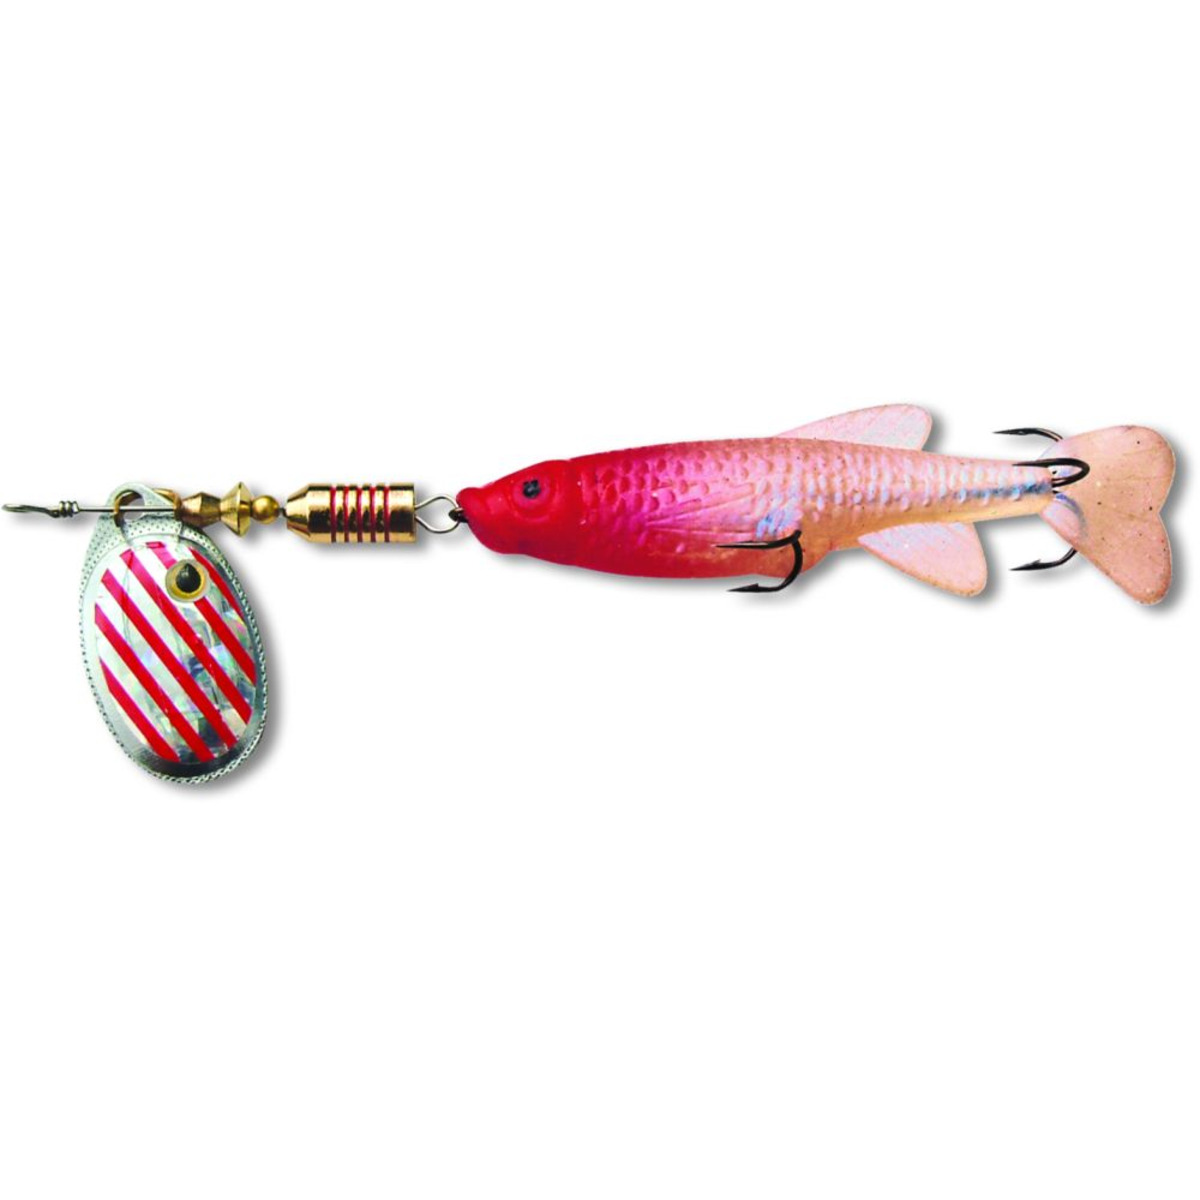 Zebco Minnow Flyer - 7 g - silver/red